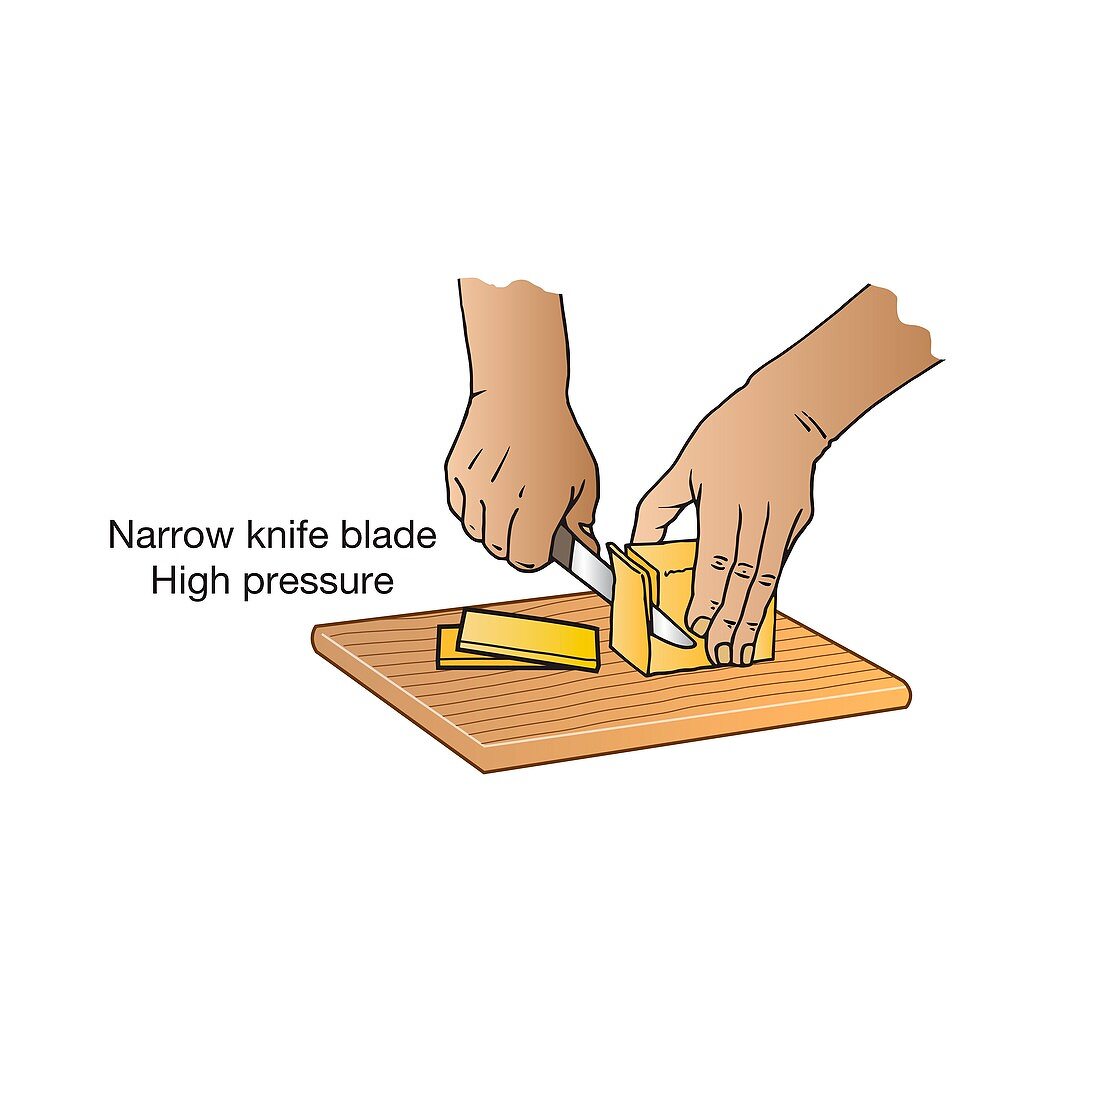 Pressure exerted by a sharp knife, illustration